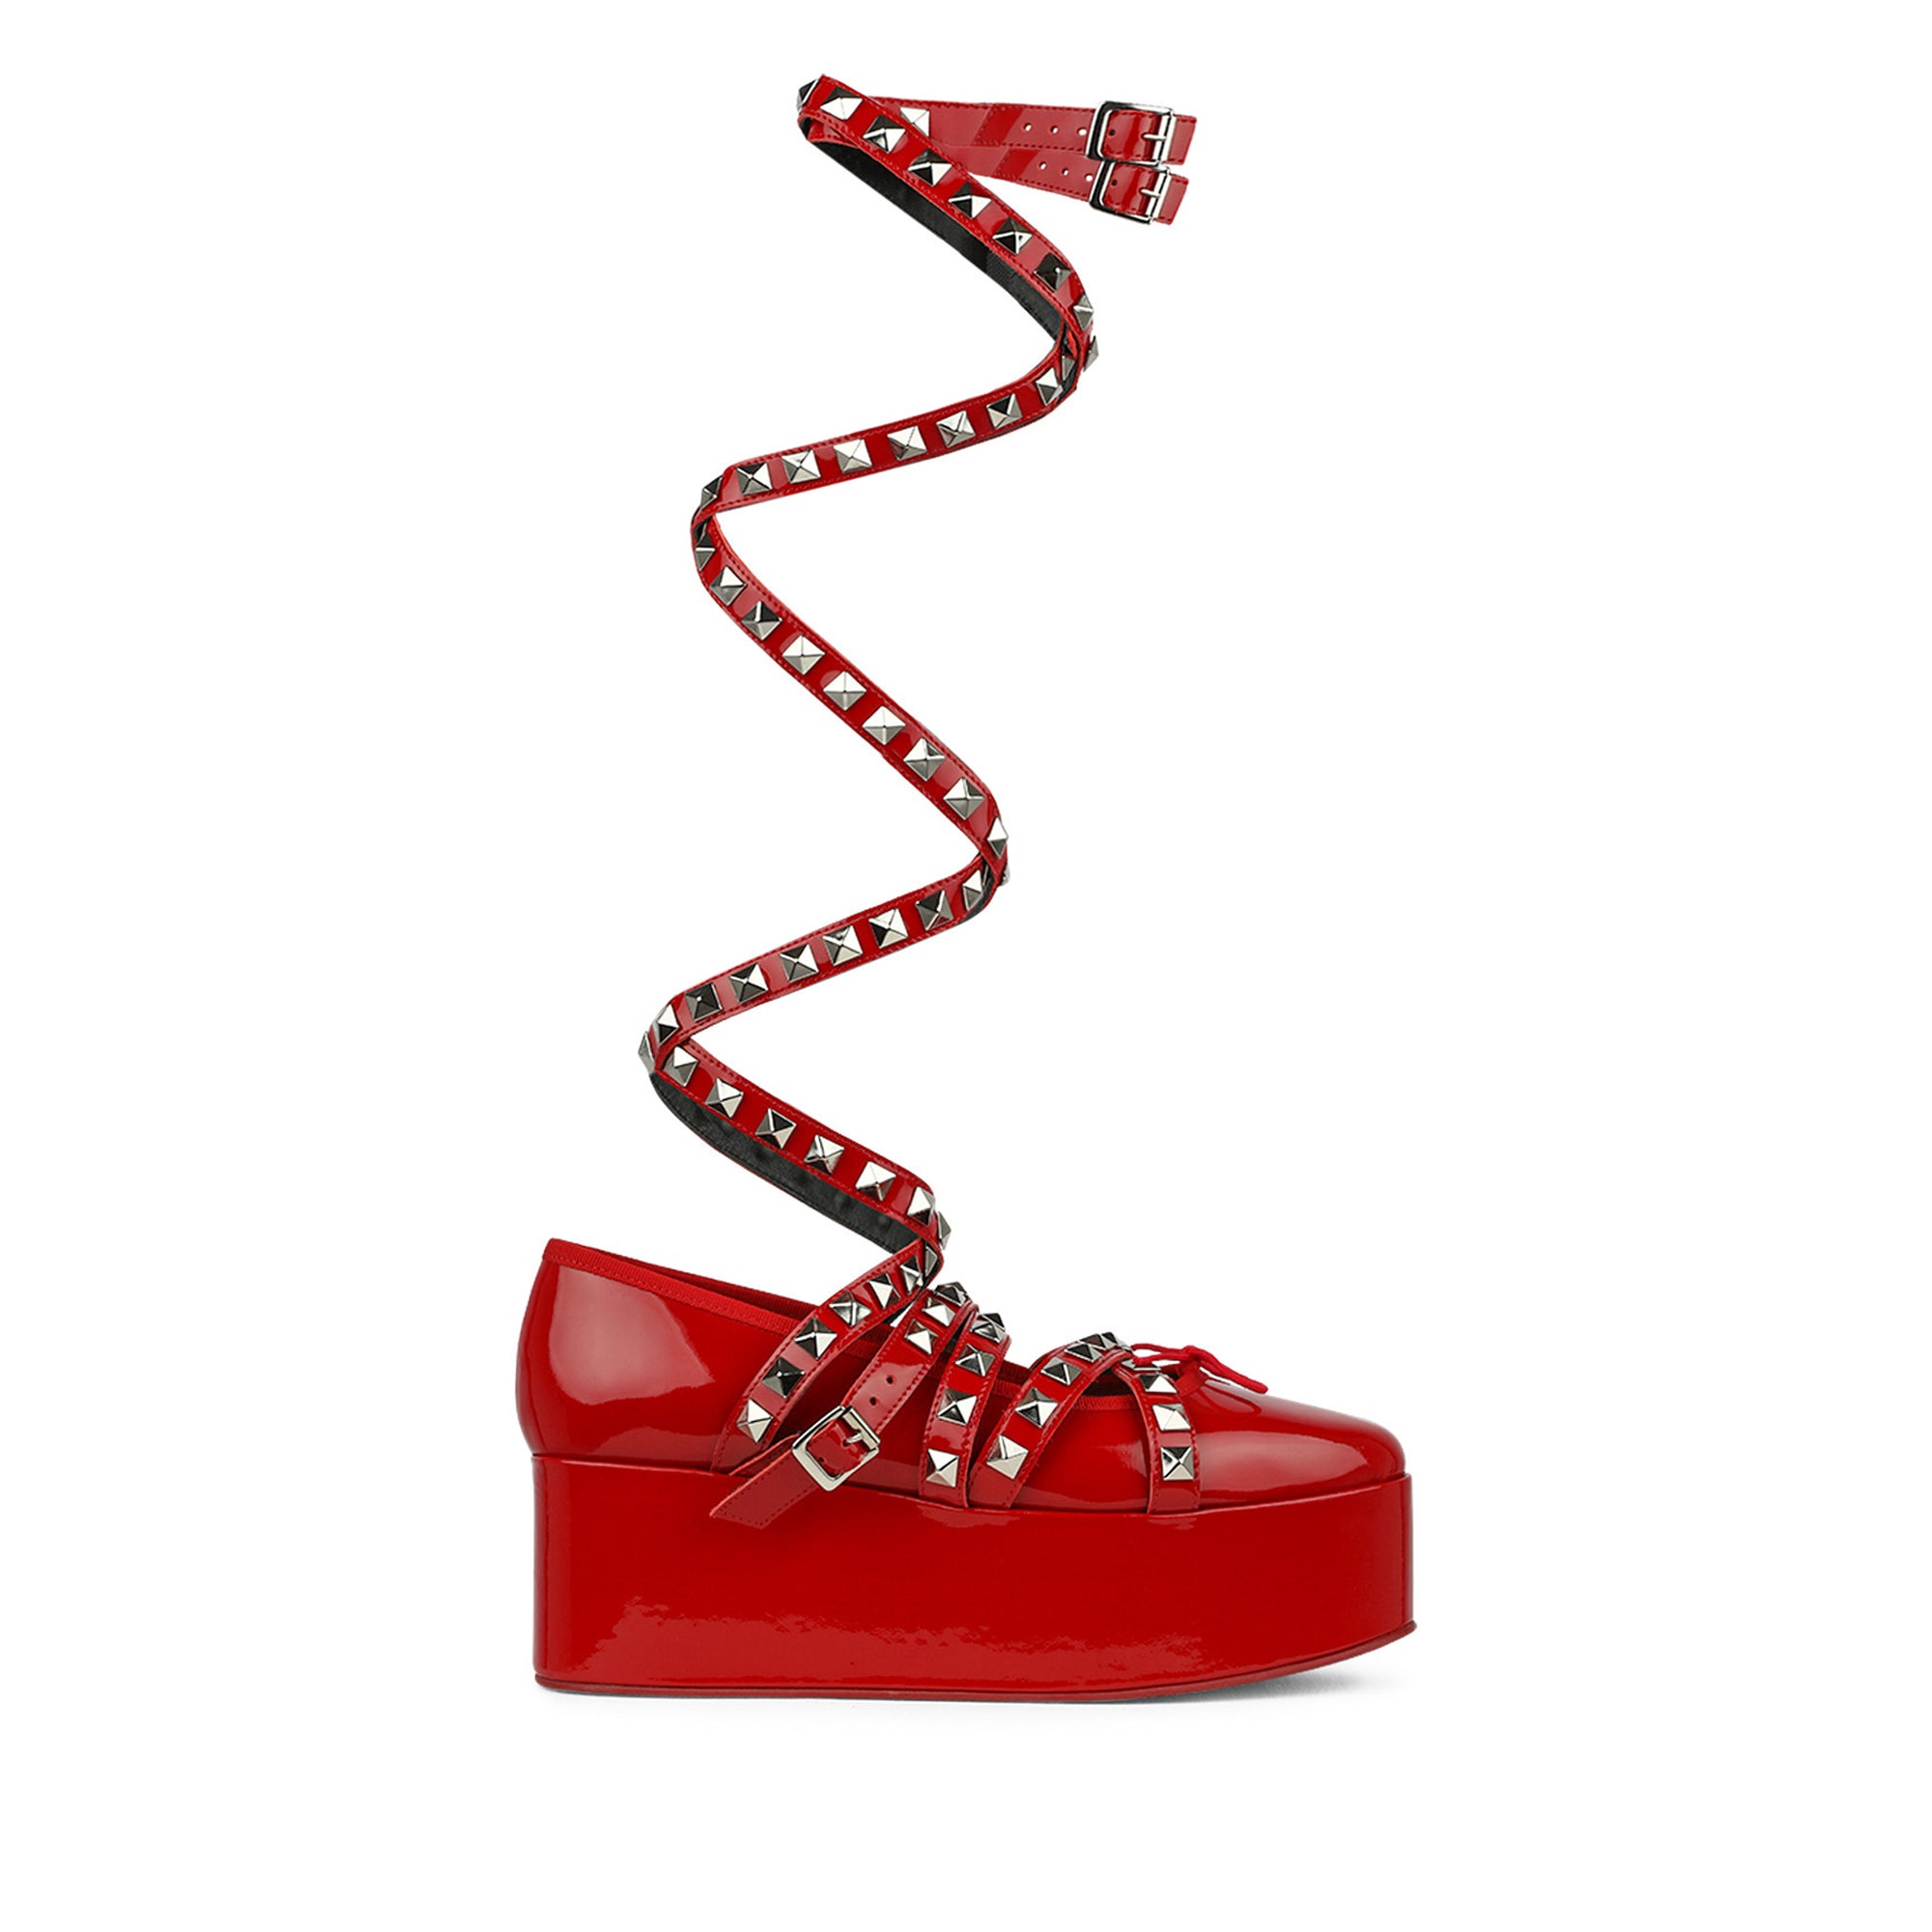 Noir Kei Ninomiya -  Repetto Platform Mary Janes With Ankle Strap - (Red) view 1